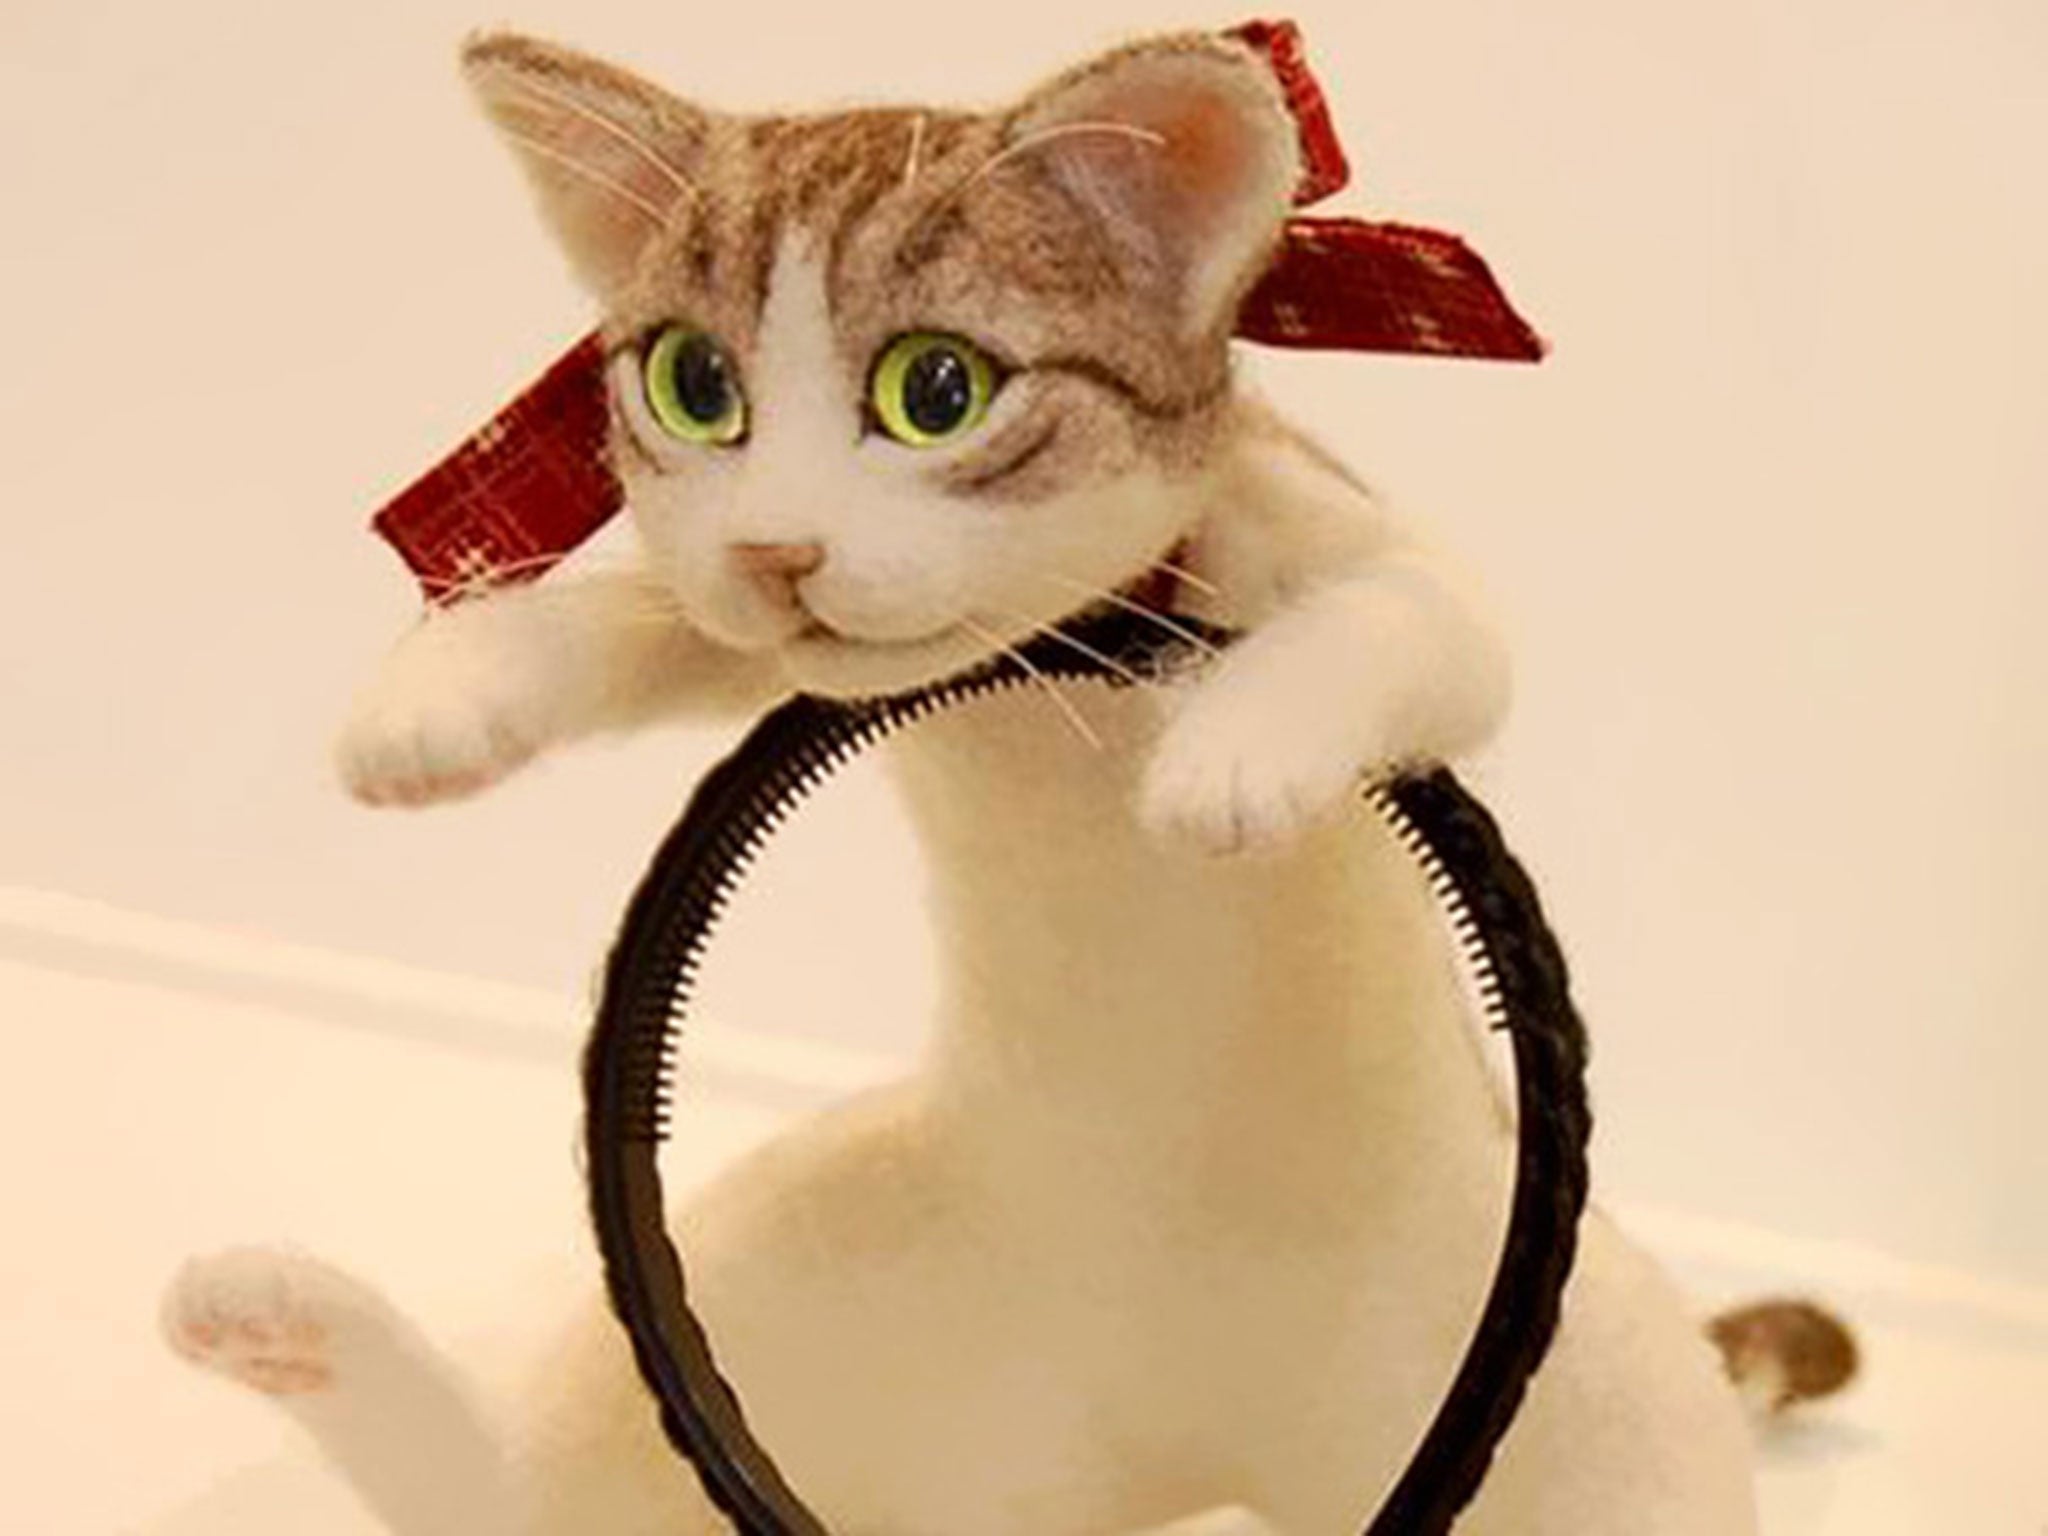 The ultimate cat hair accessory